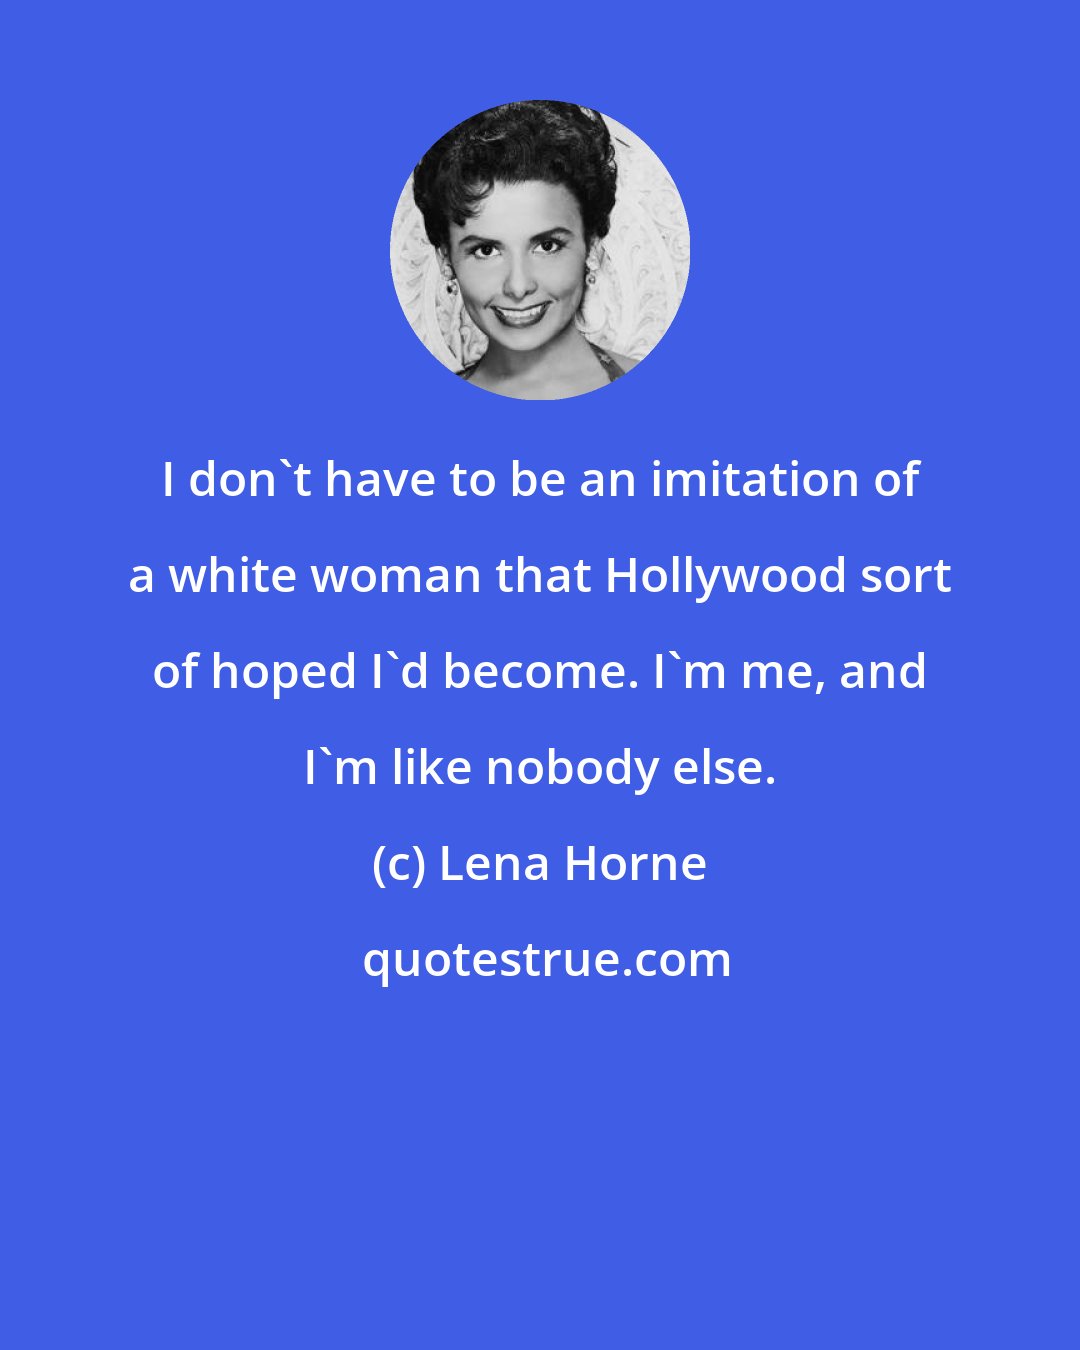 Lena Horne: I don't have to be an imitation of a white woman that Hollywood sort of hoped I'd become. I'm me, and I'm like nobody else.